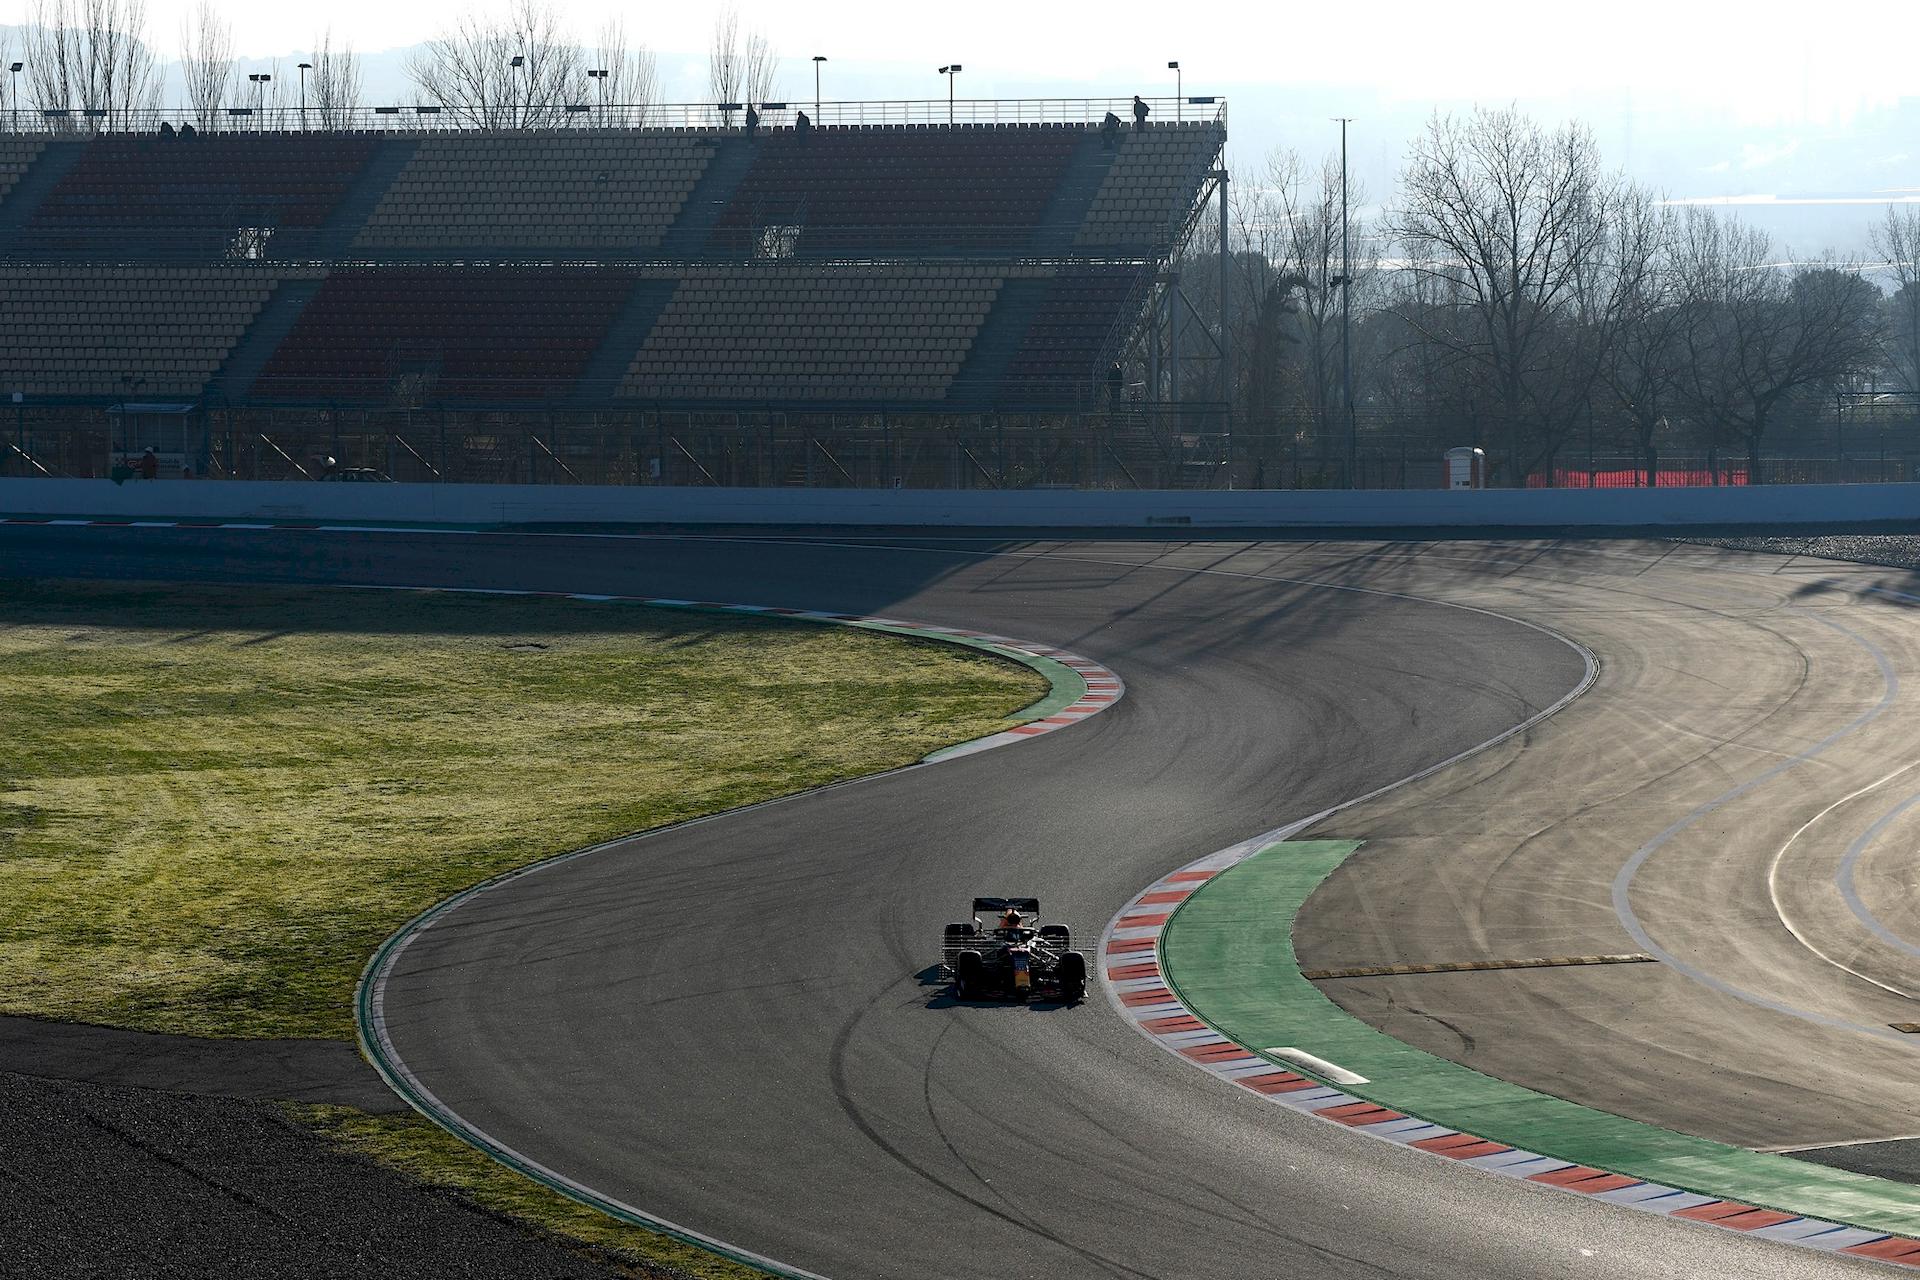 F1 Test Barcellona 2020 Day-2